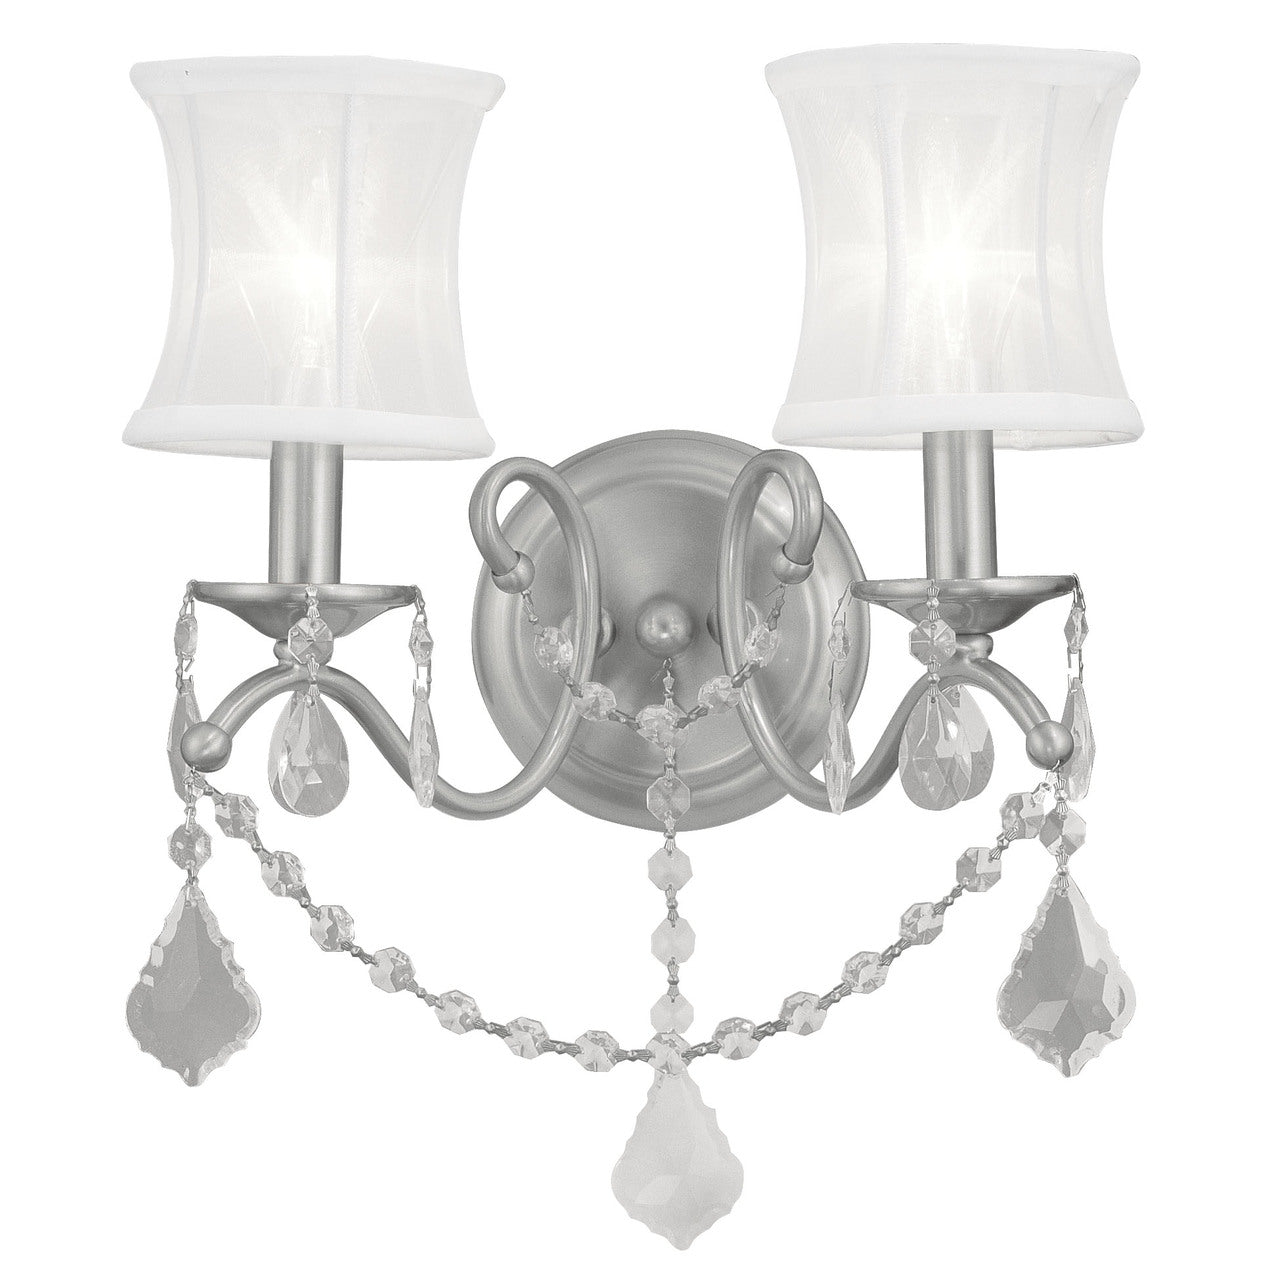 LIVEX Lighting 6302-91 Newcastle Wall Sconce in Brushed Nickel (2 Light)